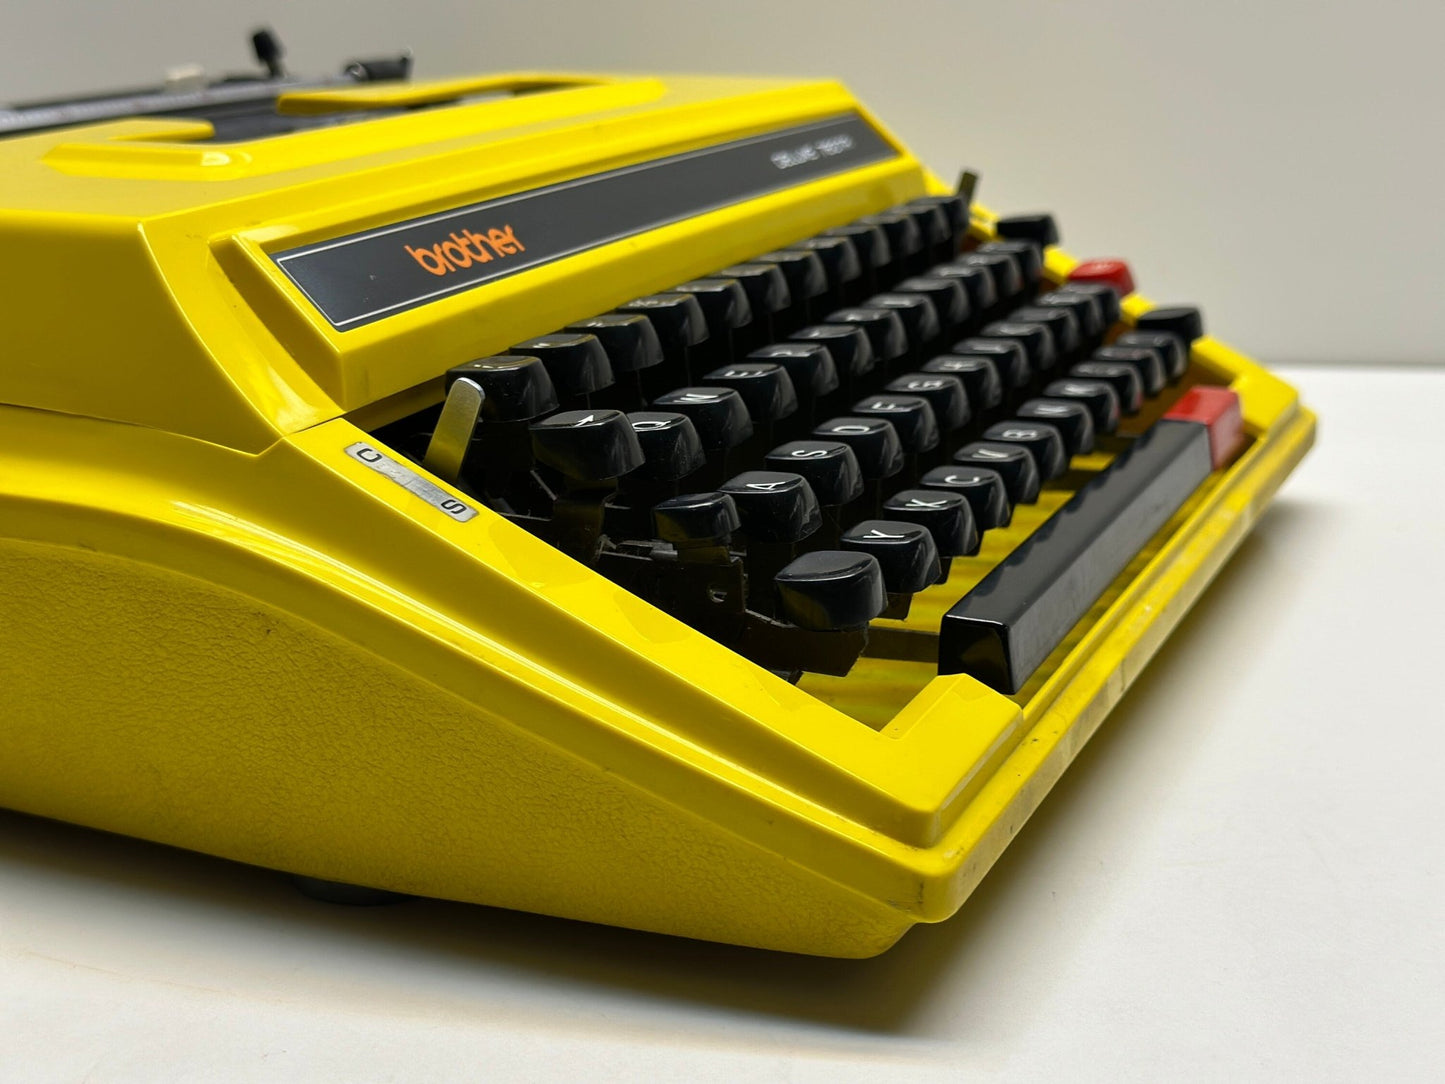 Brother Deluxe 760TR Typewriter - QWERTZ Keyboard, Yellow Aesthetics, and Versatility with Matching Bag